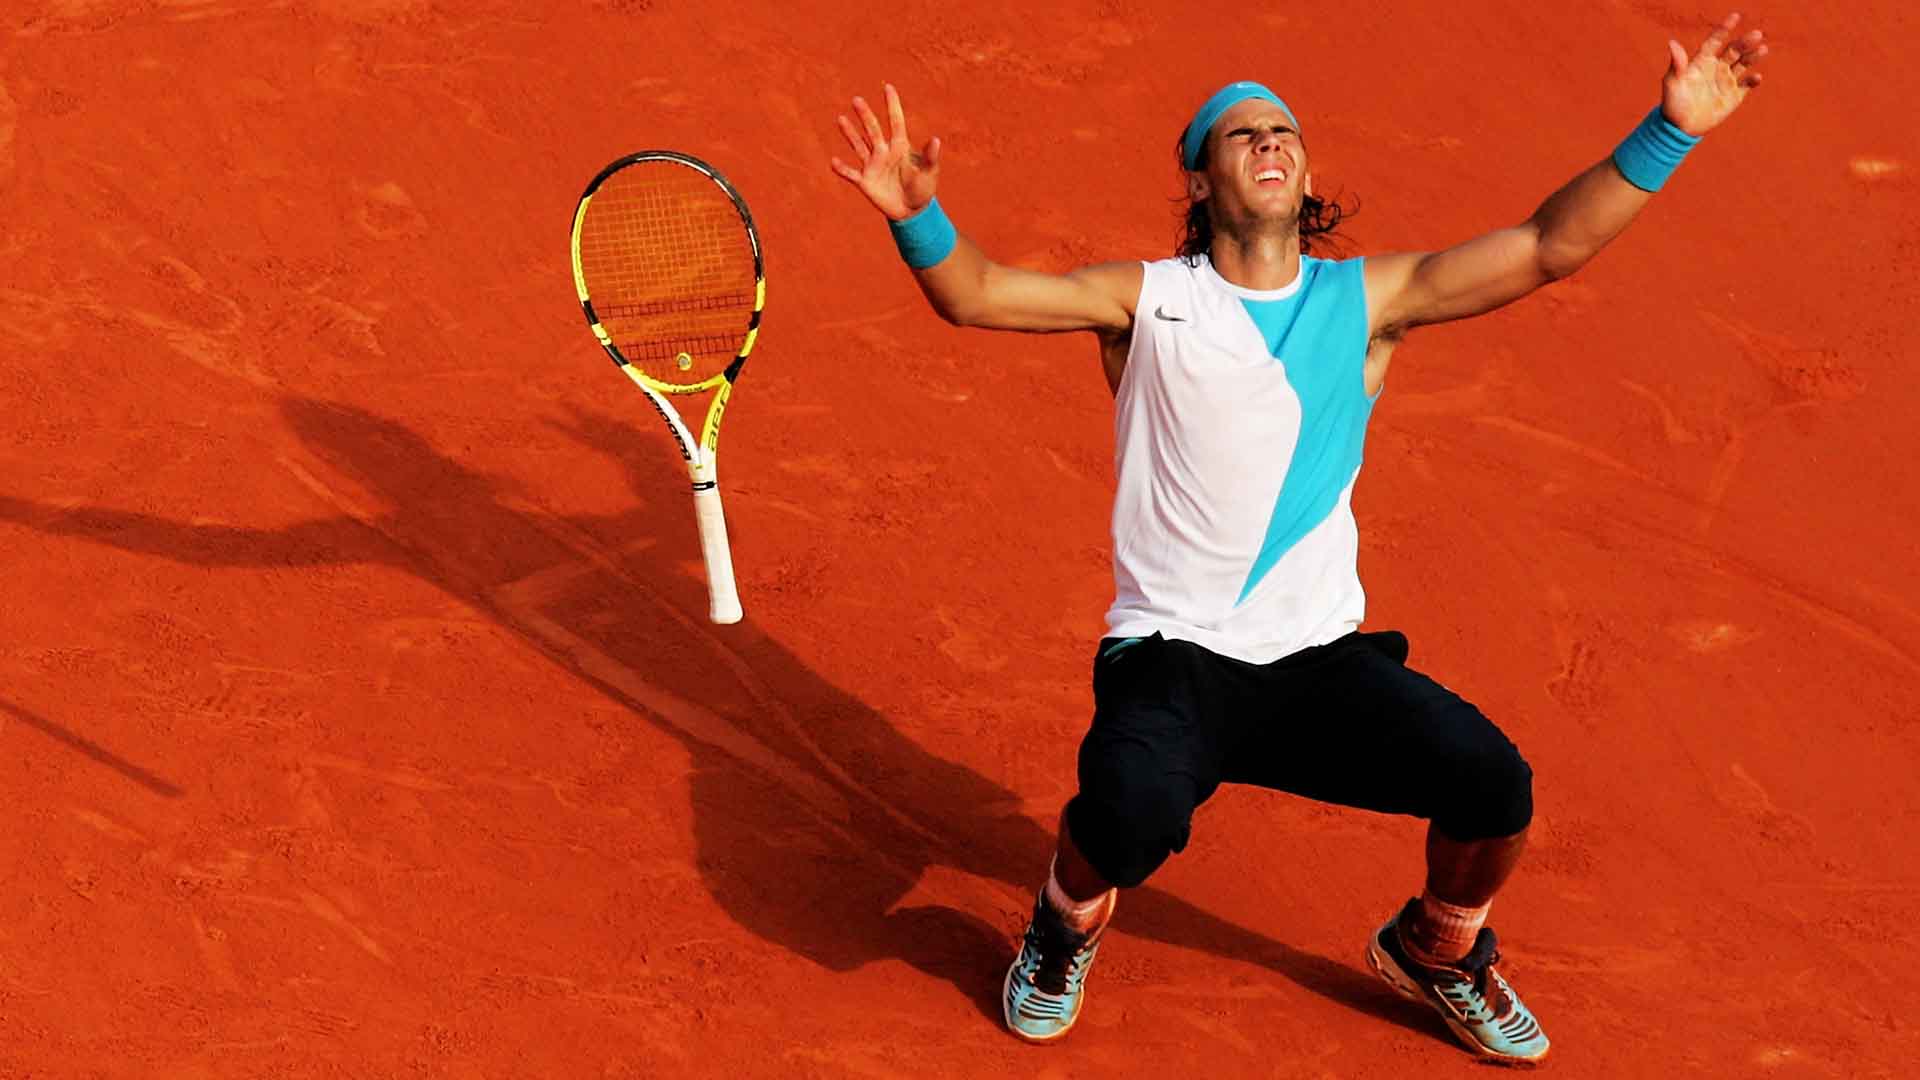 Rafael Nadal beats Roger Federer 6-3, 4-6, 6-3, 6-4 to increase his unbeaten record at Roland Garros to 21-0. 